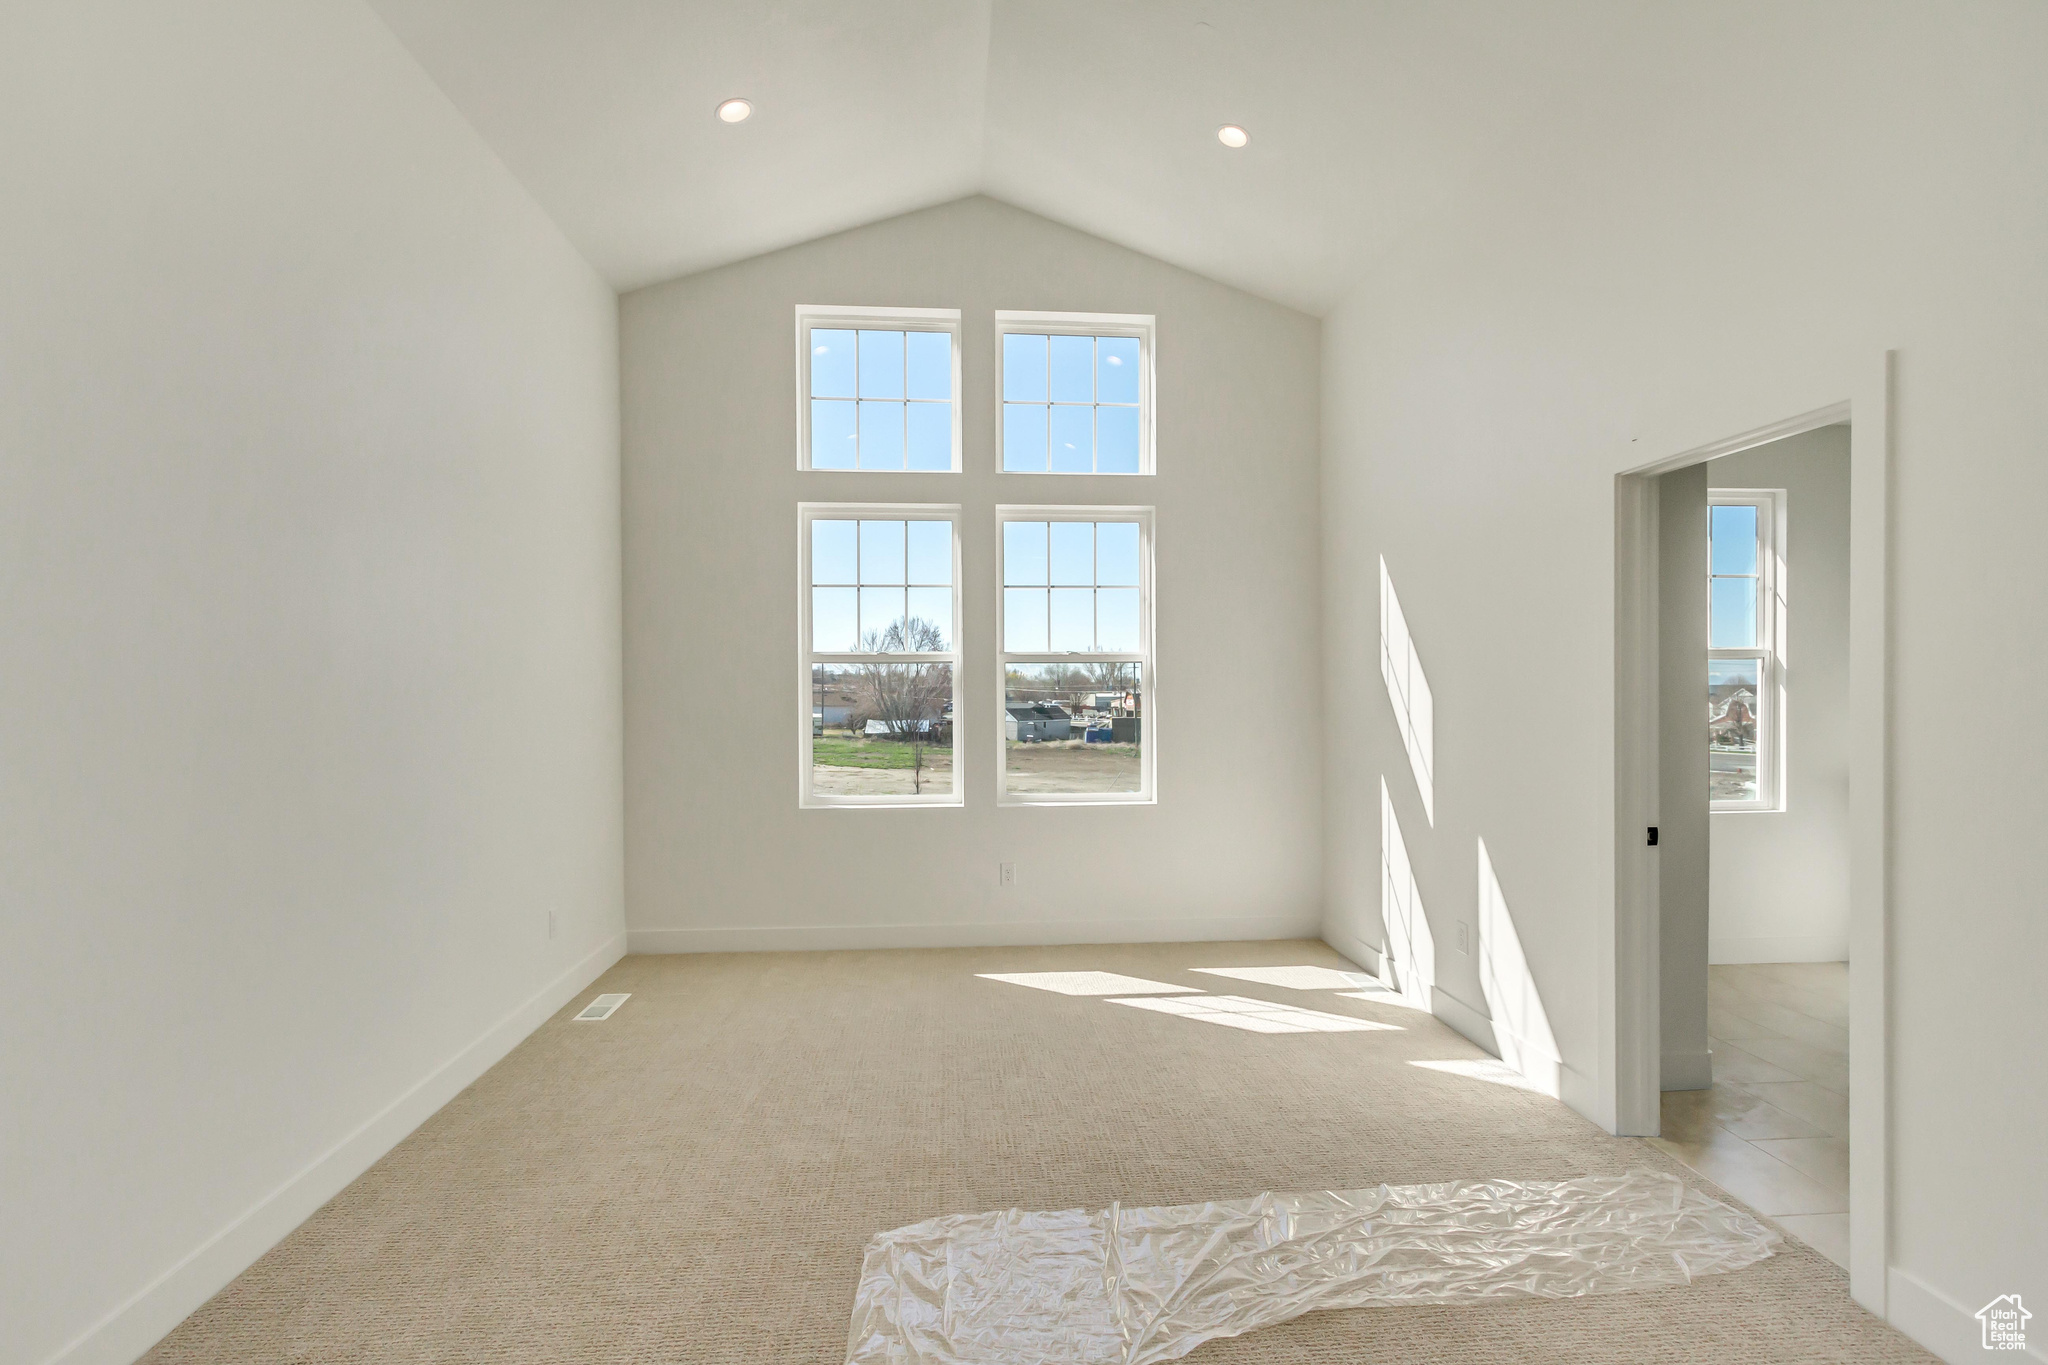 Unfurnished room with a healthy amount of sunlight, light colored carpet, and vaulted ceiling